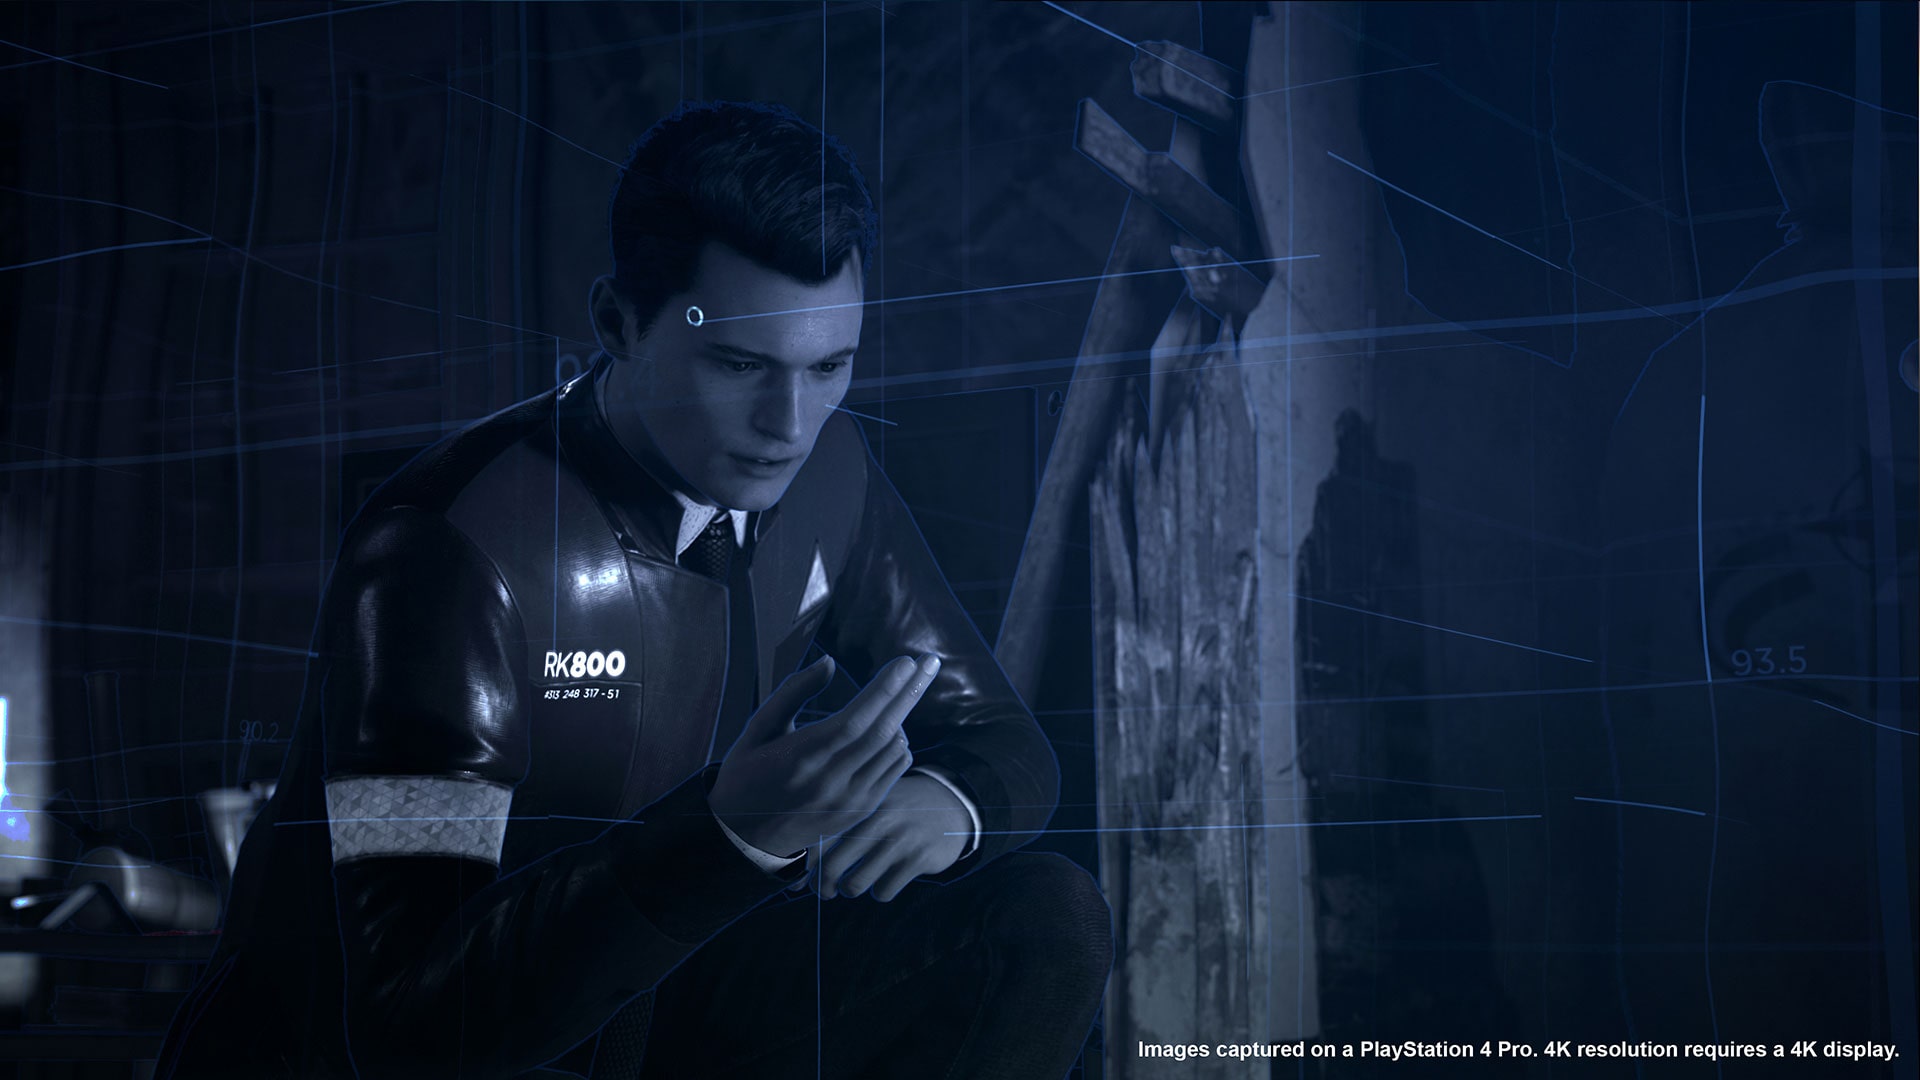 Download the Detroit: Become Human DEMO Today - Epic Games Store